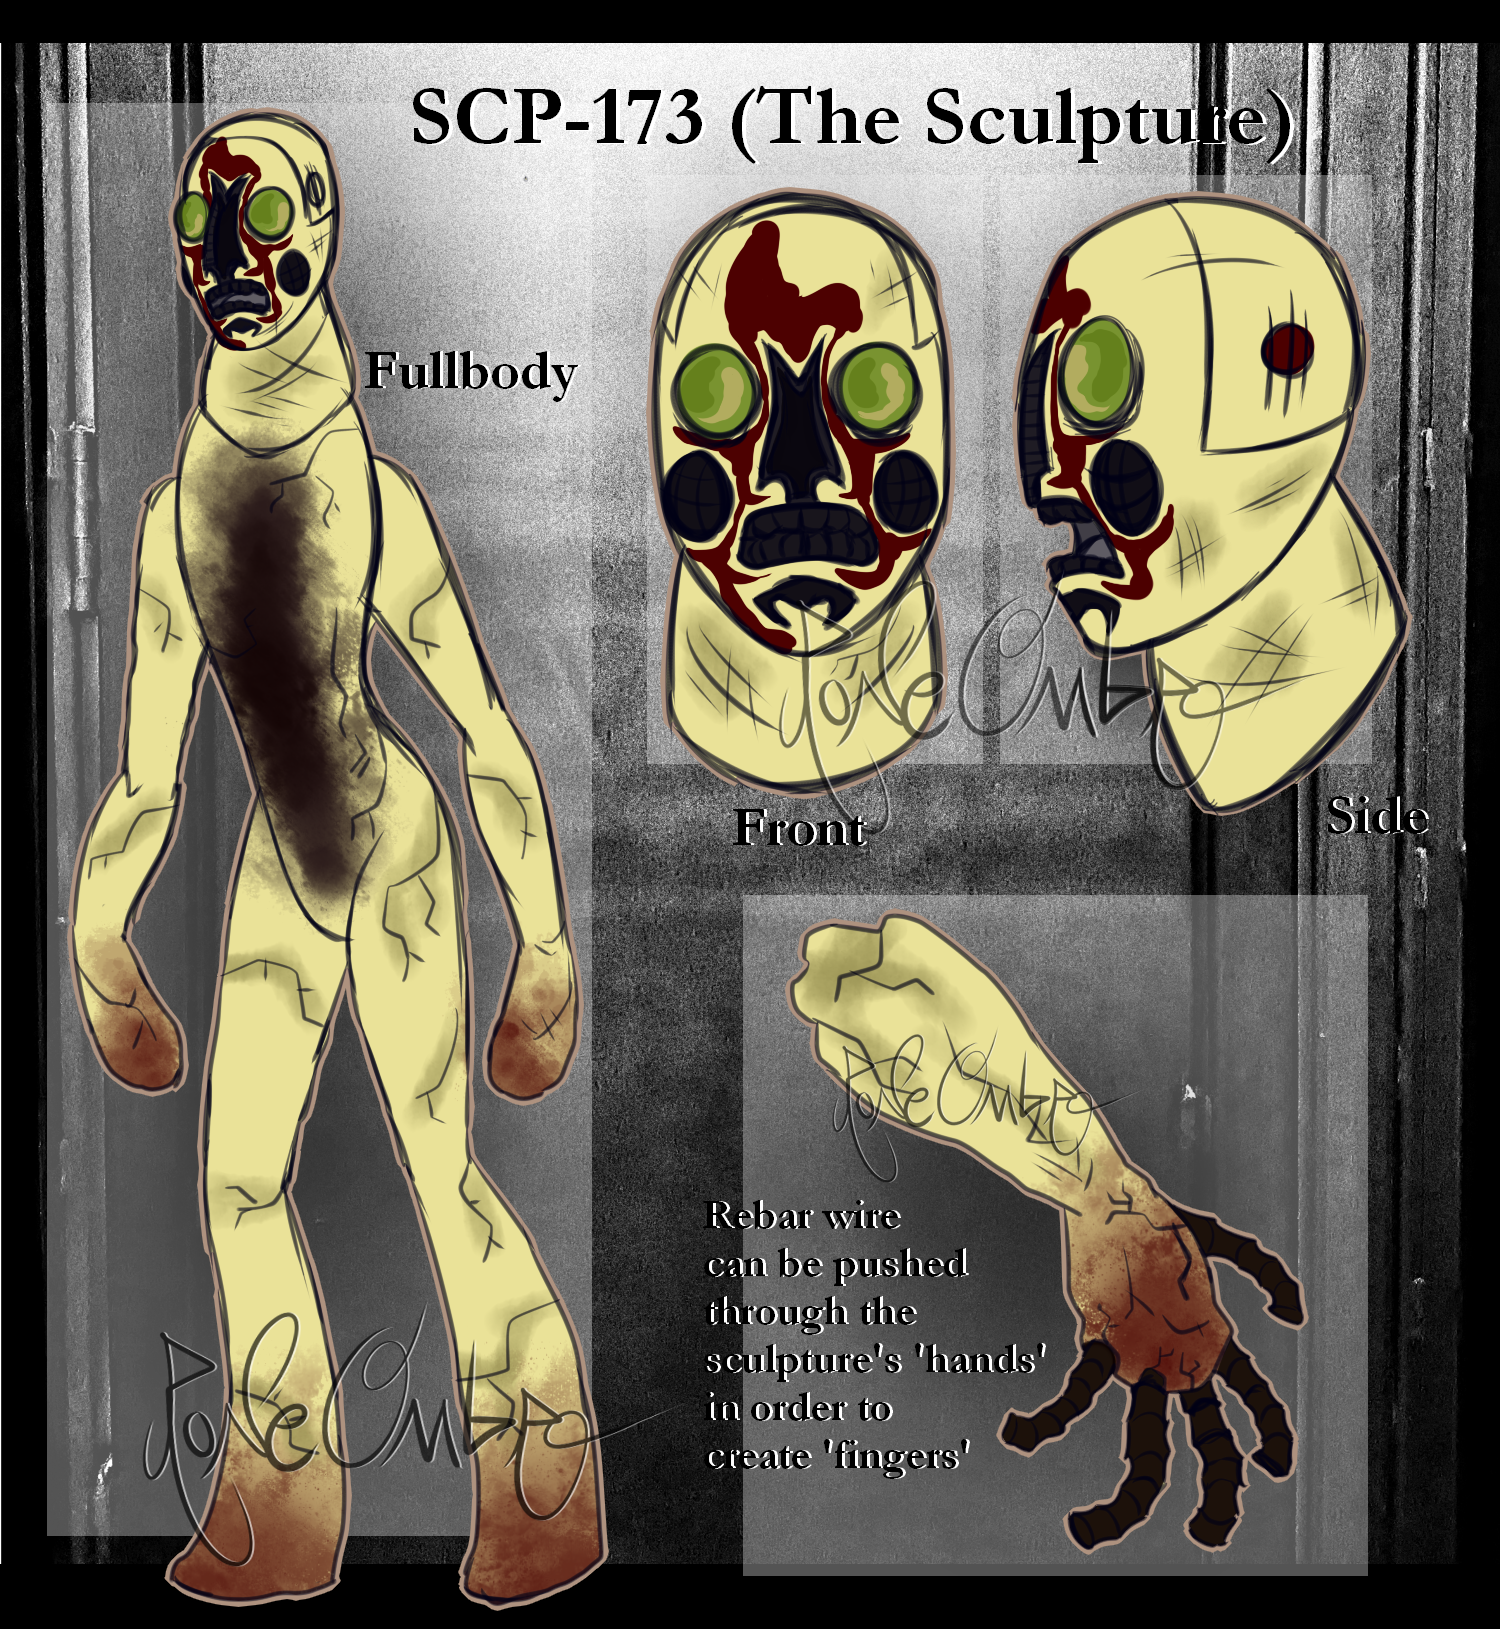 SCP D&D Monster Sheets: SCP-262, SCP-714, and SCP-504 : r/DnDHomebrew